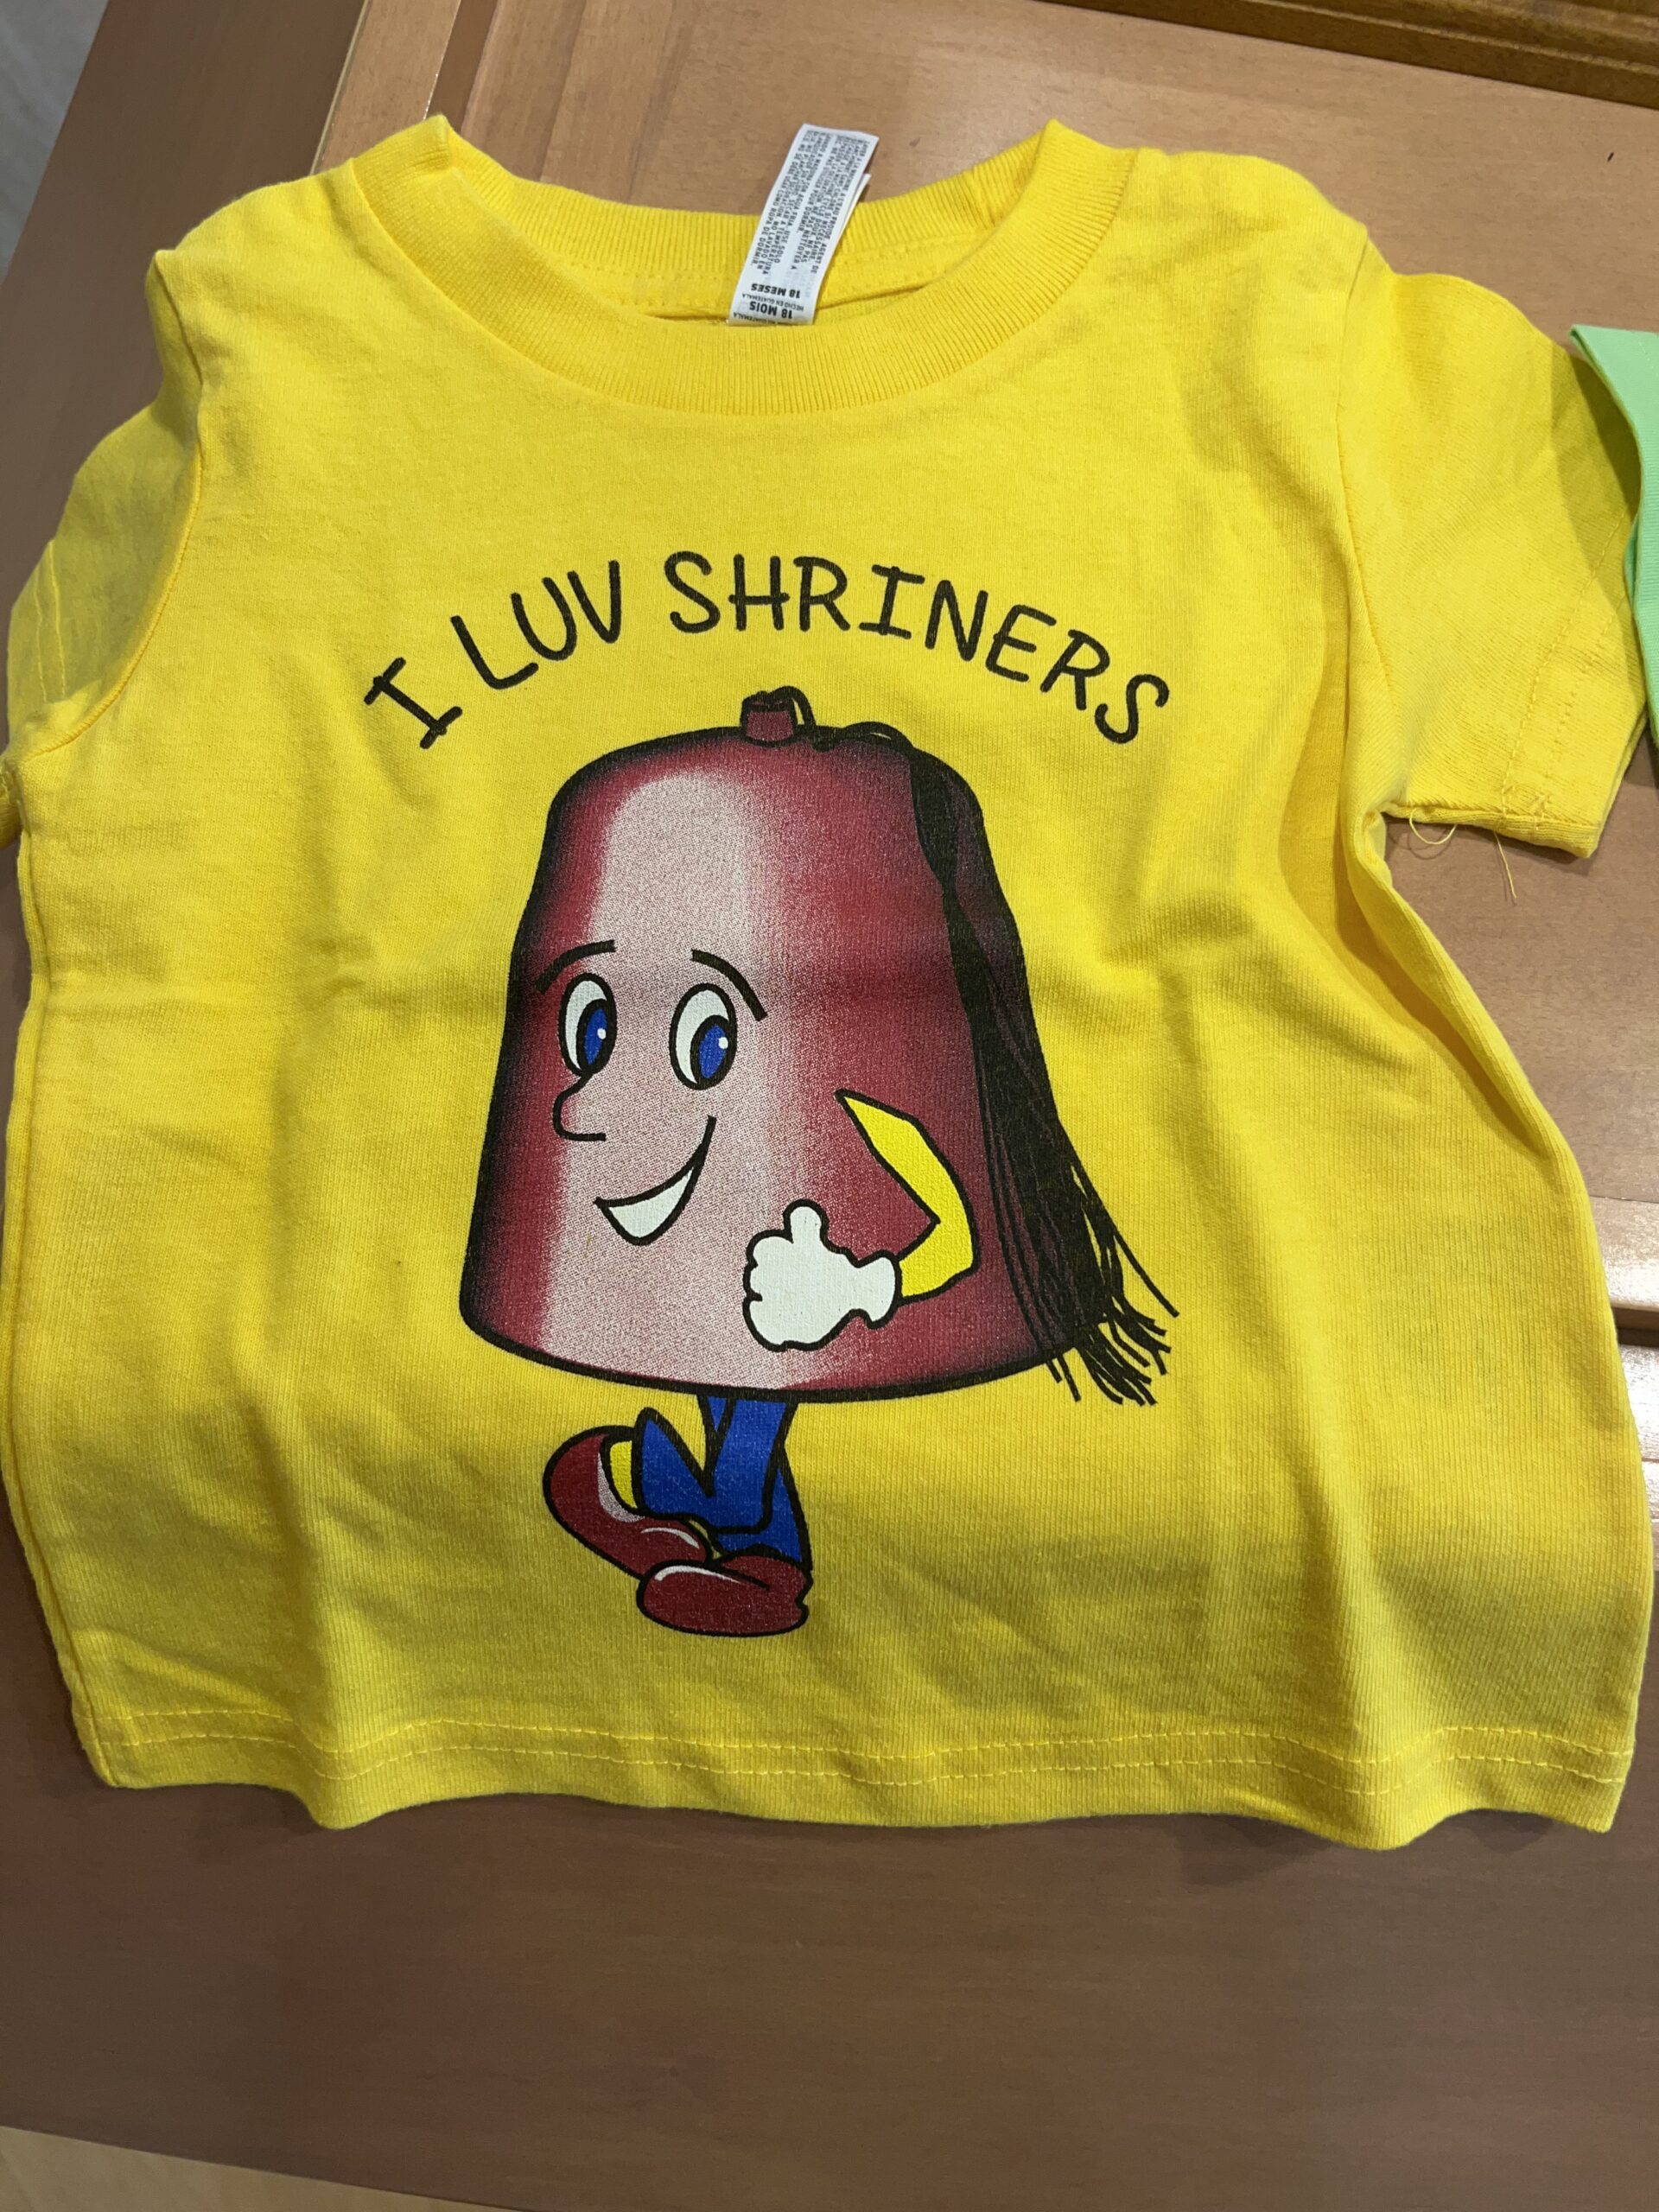 Item SH 5 - Child's T-Shirt with Shriners Logo